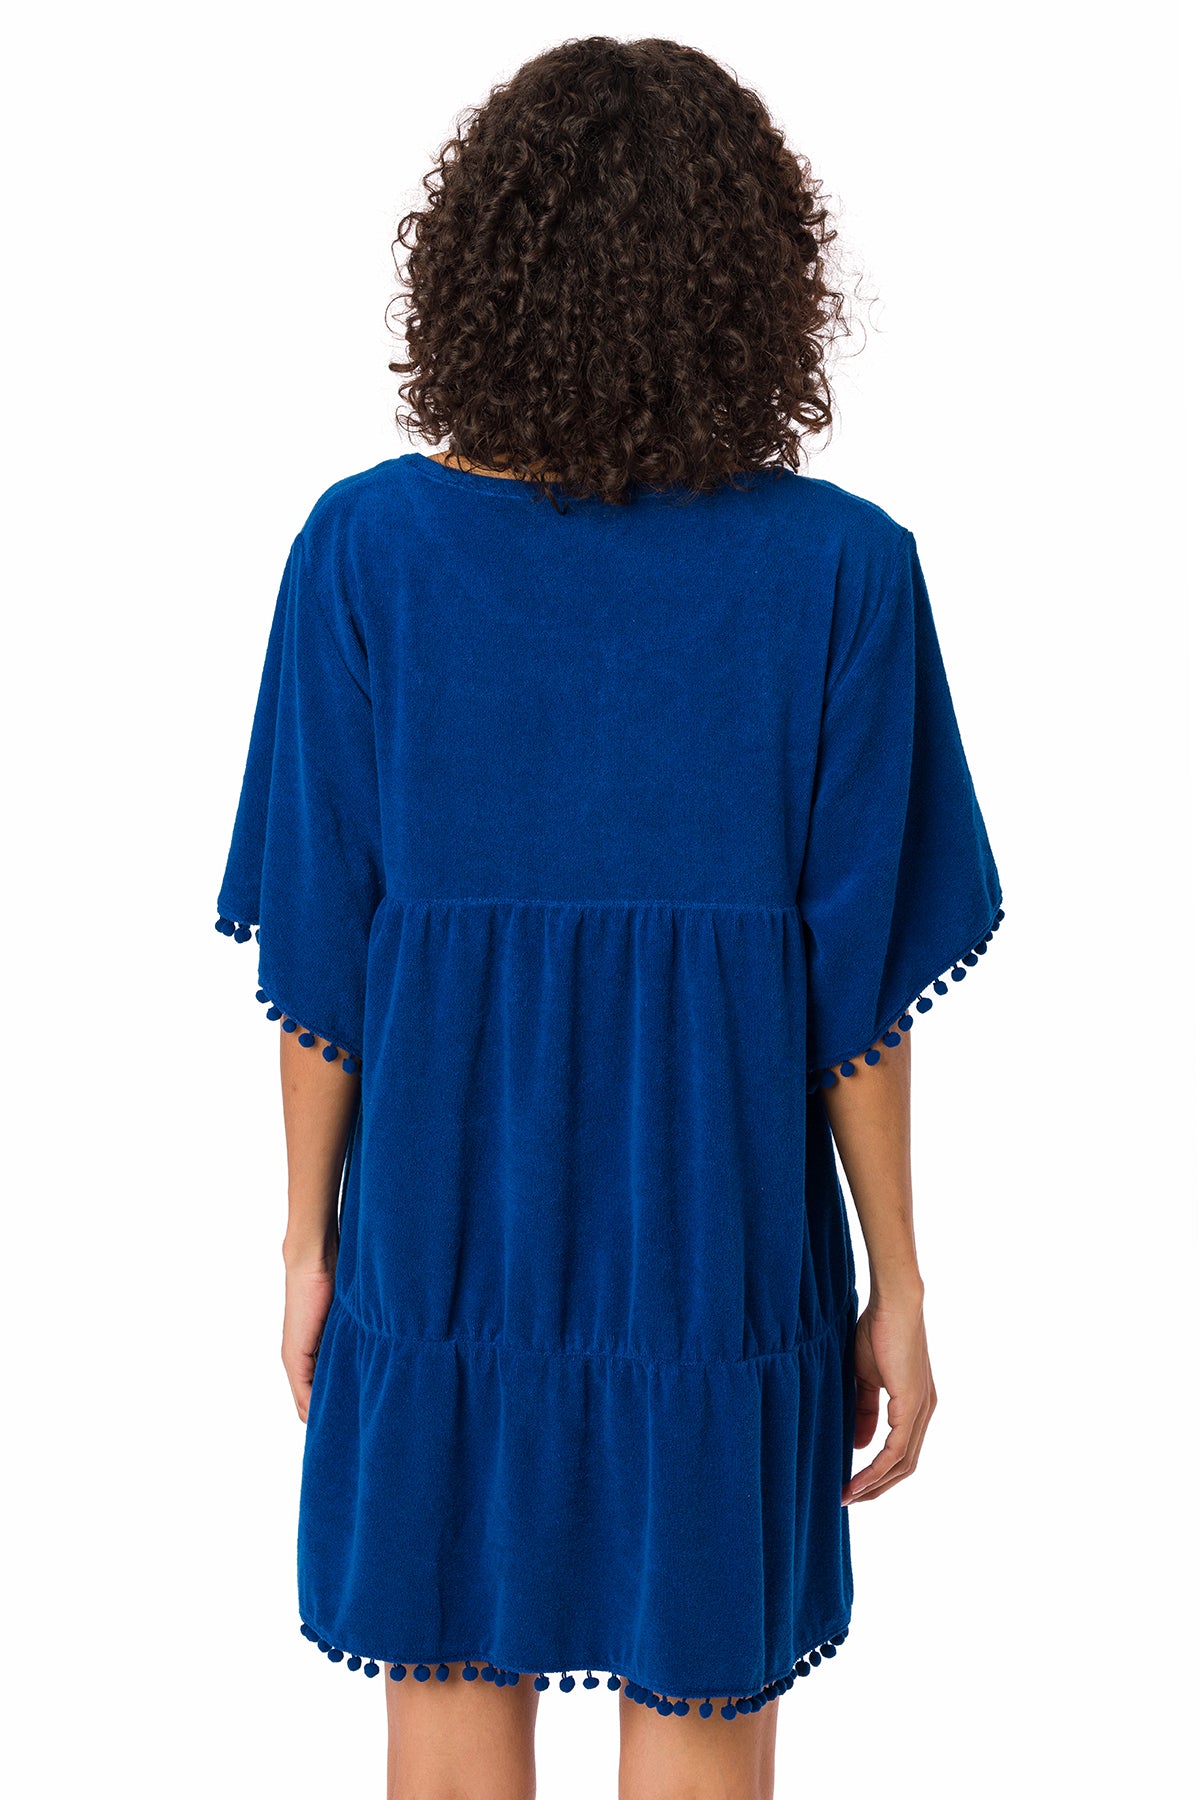 Suvi NYC women's beach-pool dress in Terry cotton Perfect for summer. outdoors or indoors.